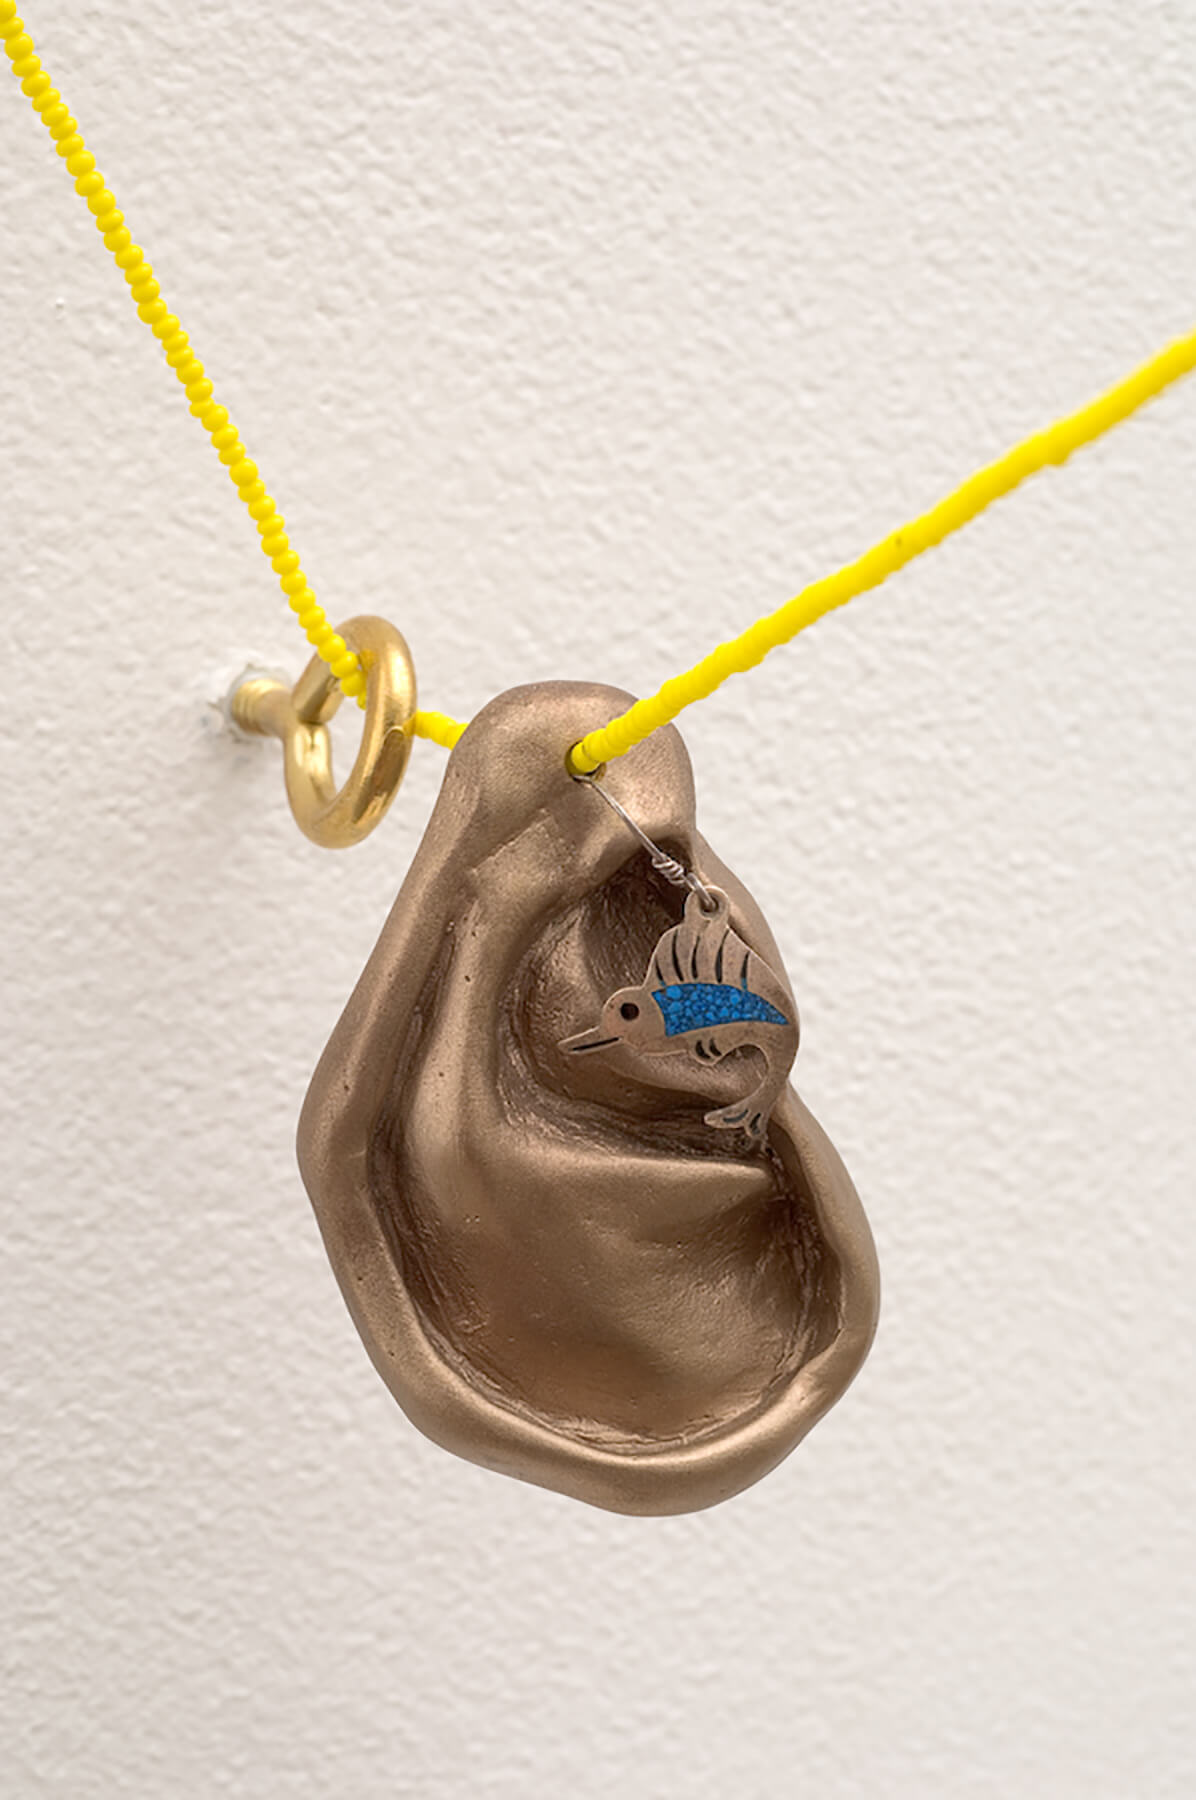 Right here, Bronze, earring, beads, fishing line, Life size, 2008